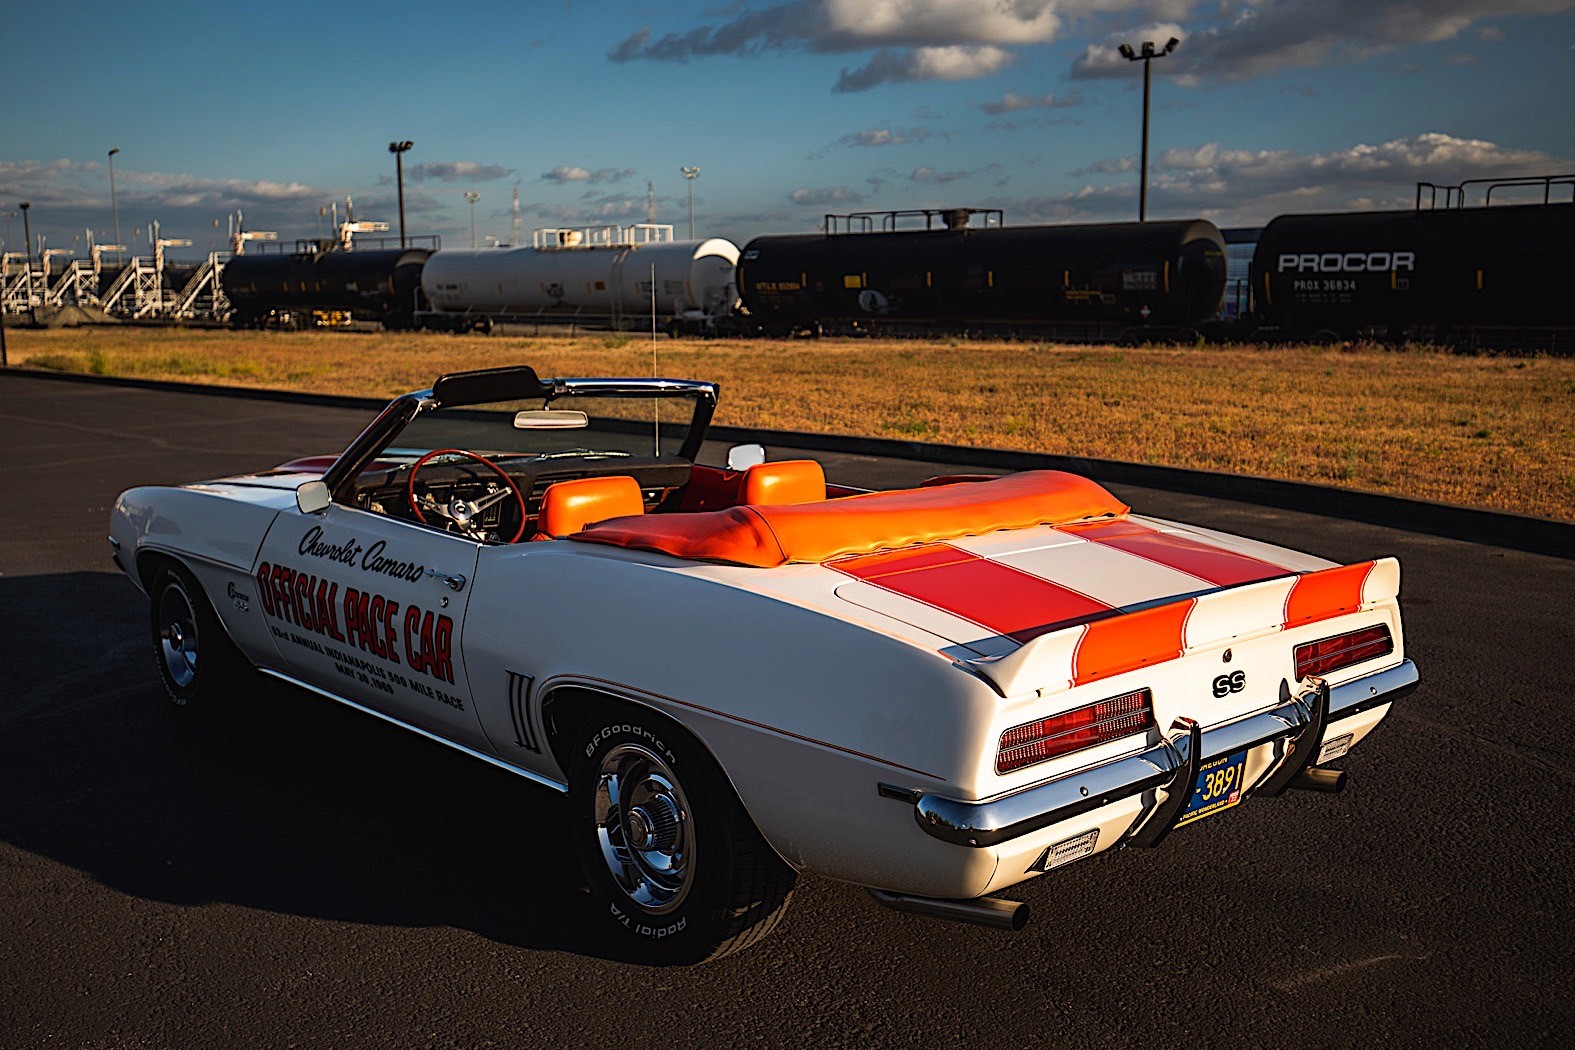 1969 Chevrolet Camaro Has The Z11 Indy 500 Pace Car Package Looks